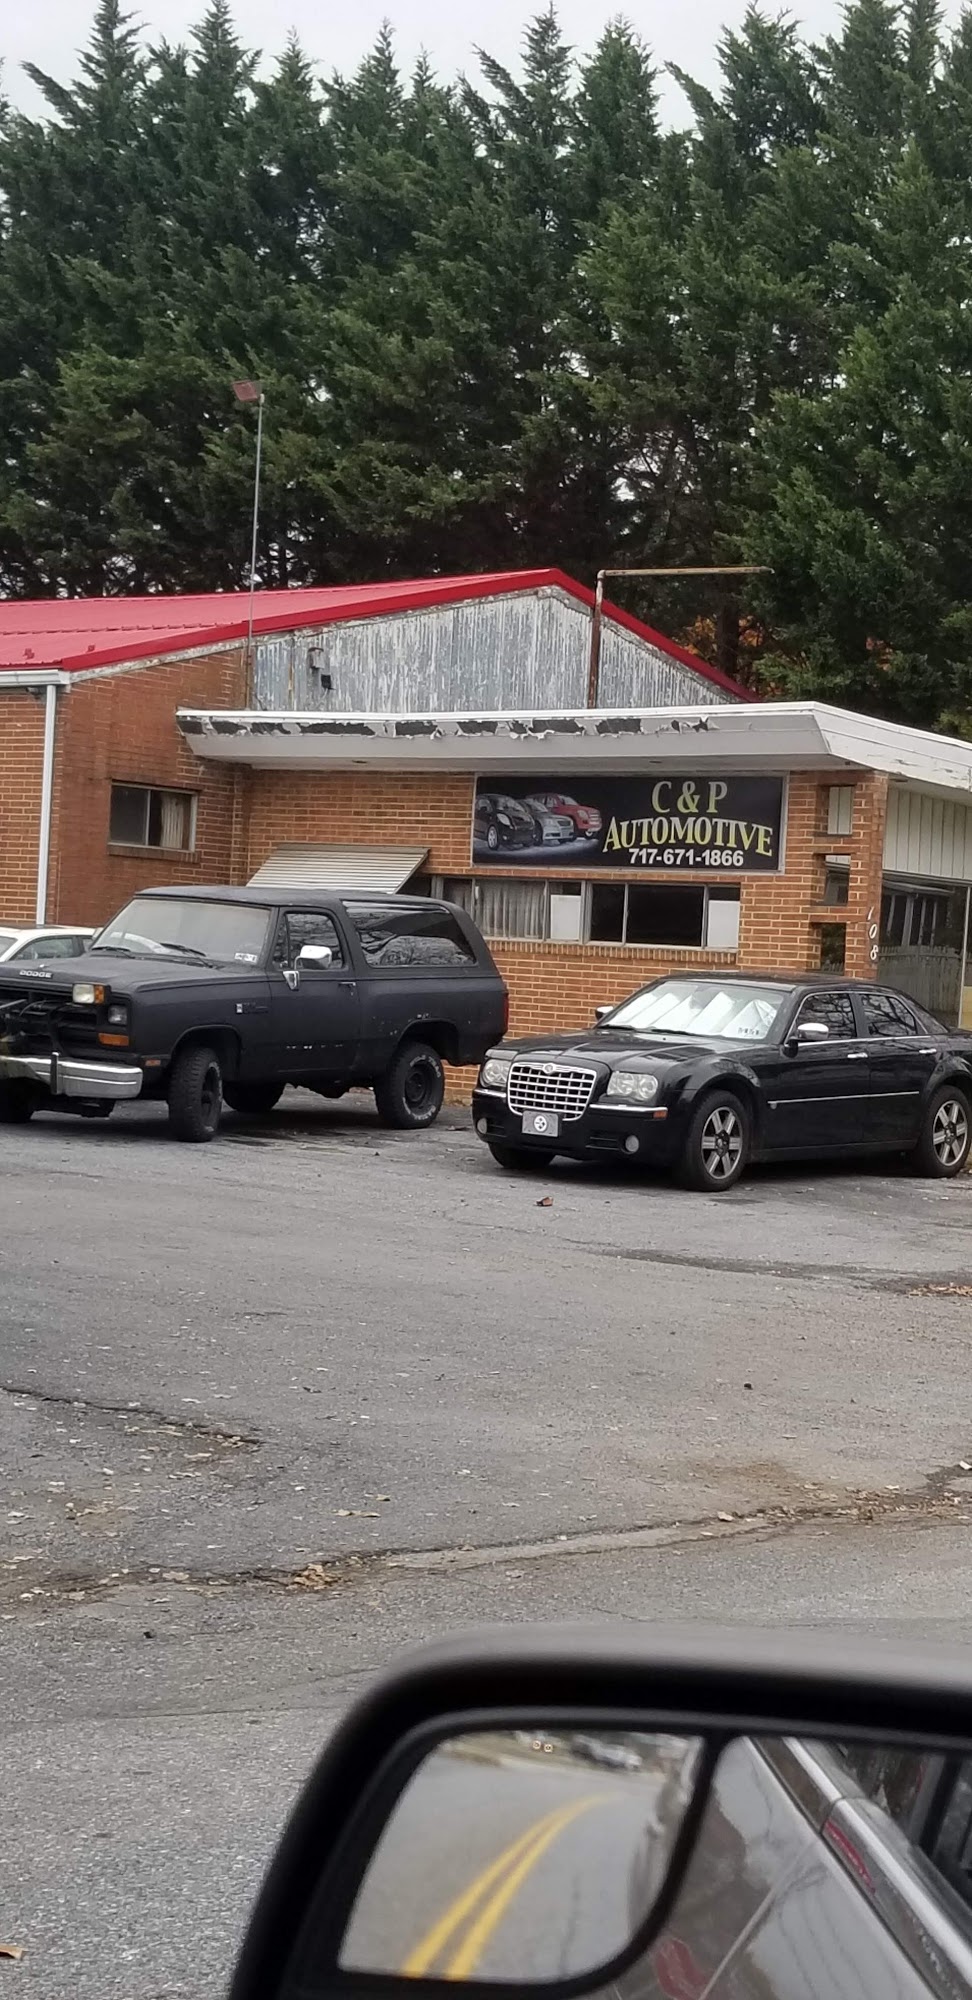 C & P Towing, Automotive and Body Shop